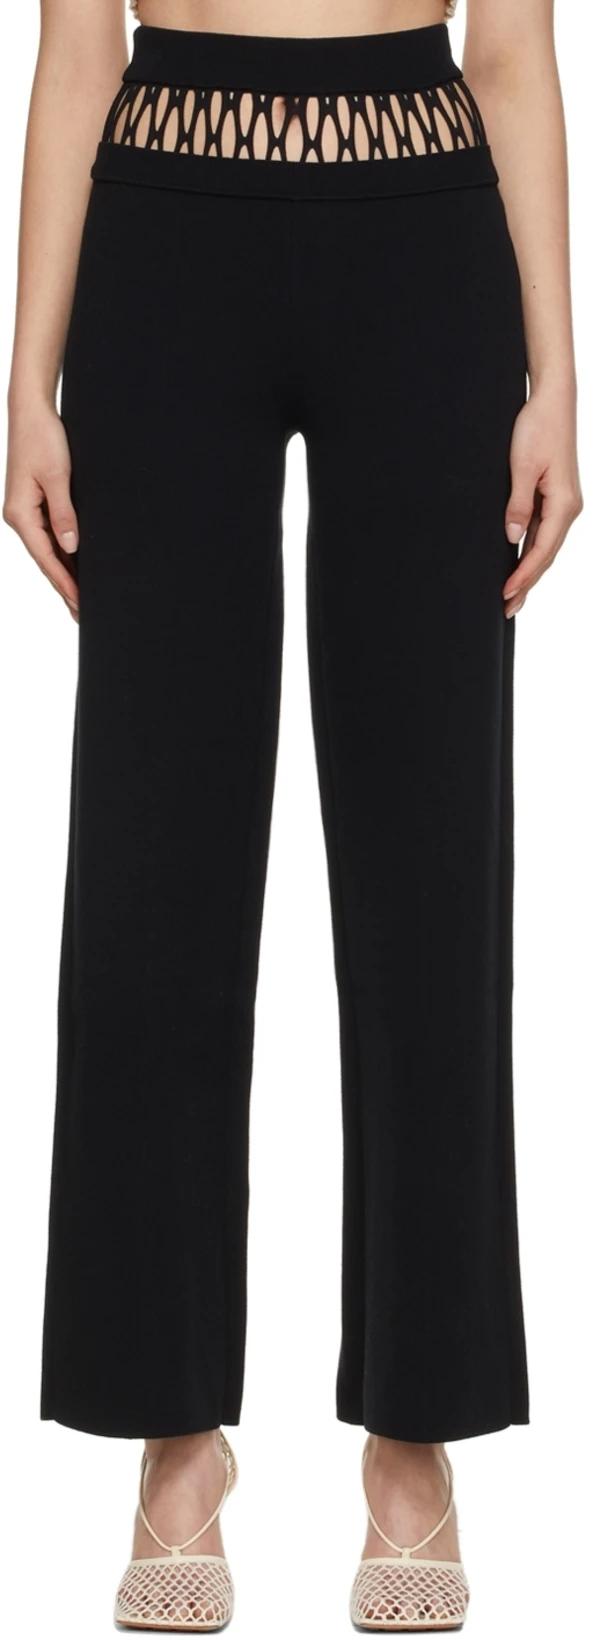 Black Mesh Trousers by DION LEE